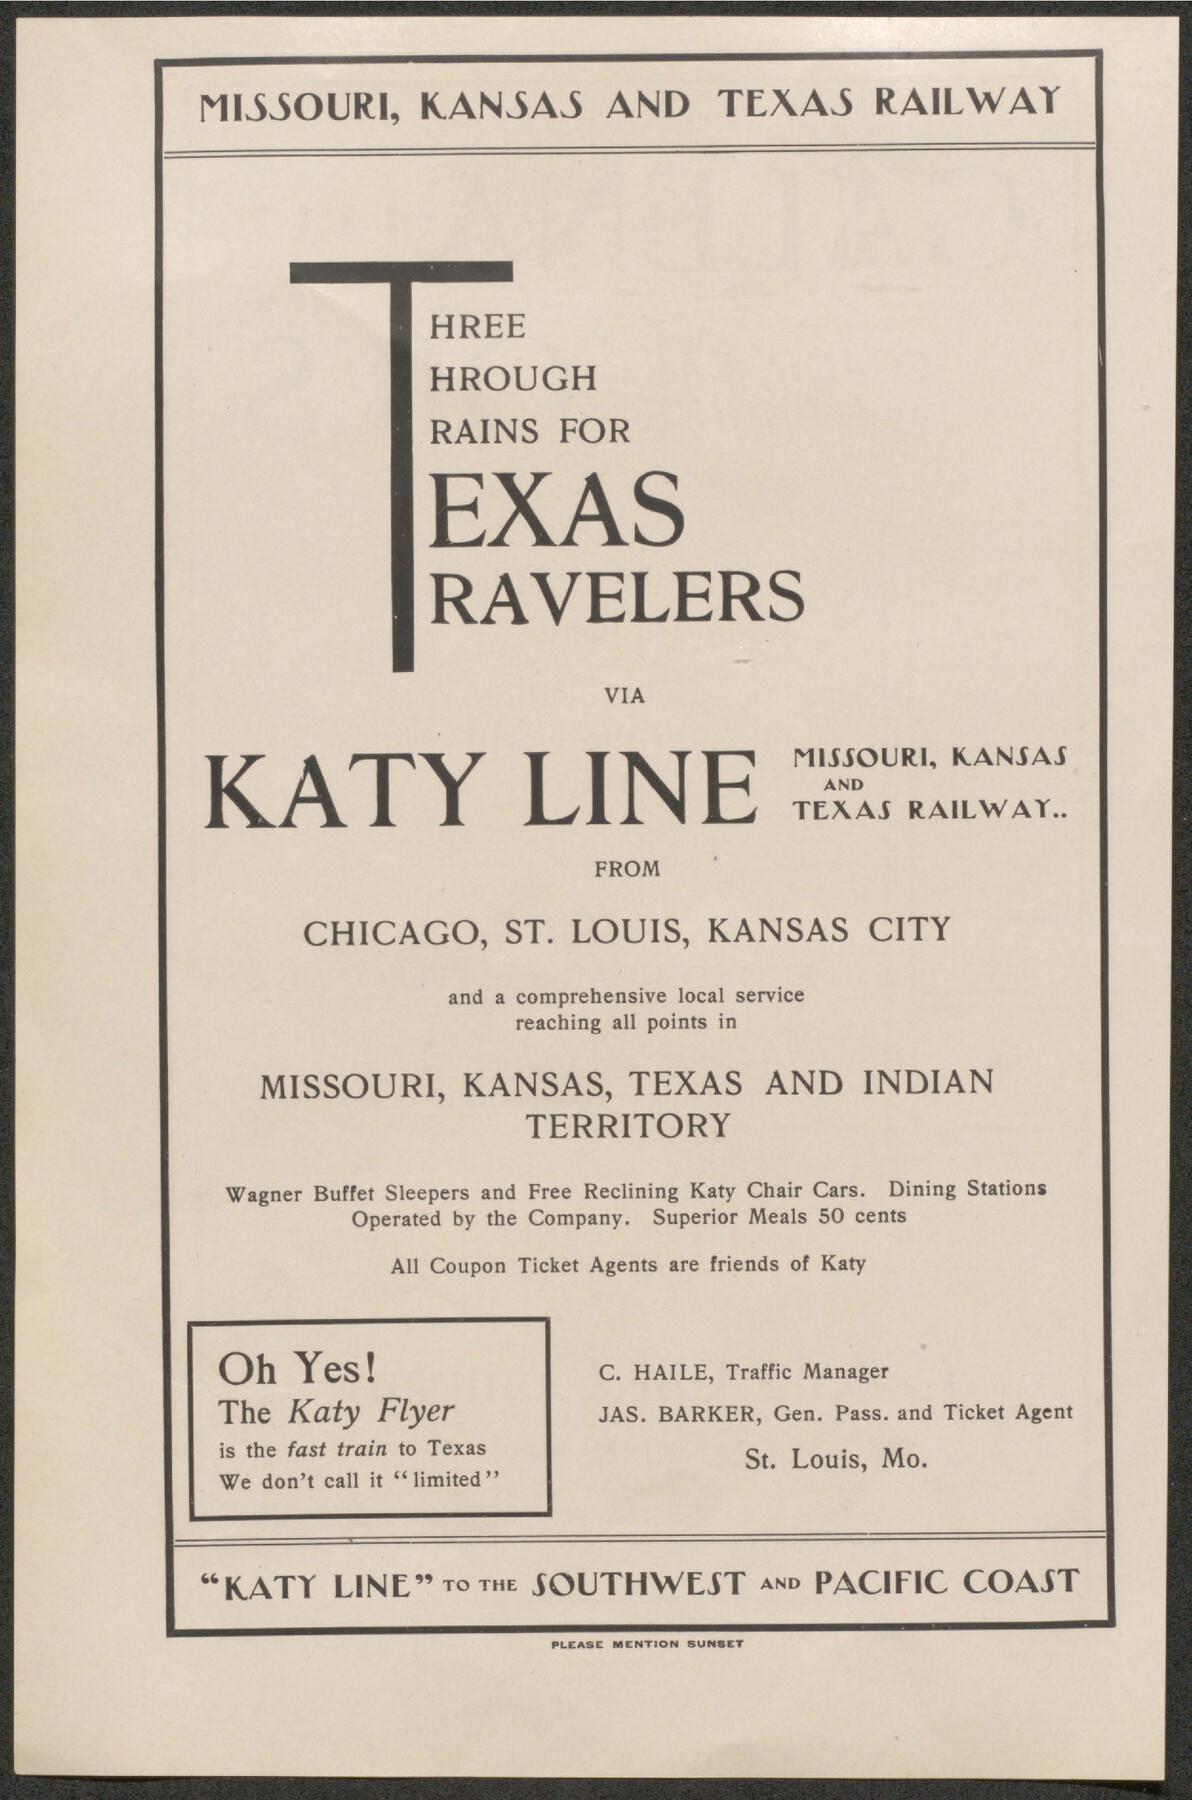 96605, Three Through Trains for Texas Travelers via Katy Line - Missouri, Kansas and Texas Railway from Chicago, St. Louis, Kansas City and a comprehensive local service reaching all points in Missouri, Kansas, Texas and Indian Territory, Cobb Digital Map Collection